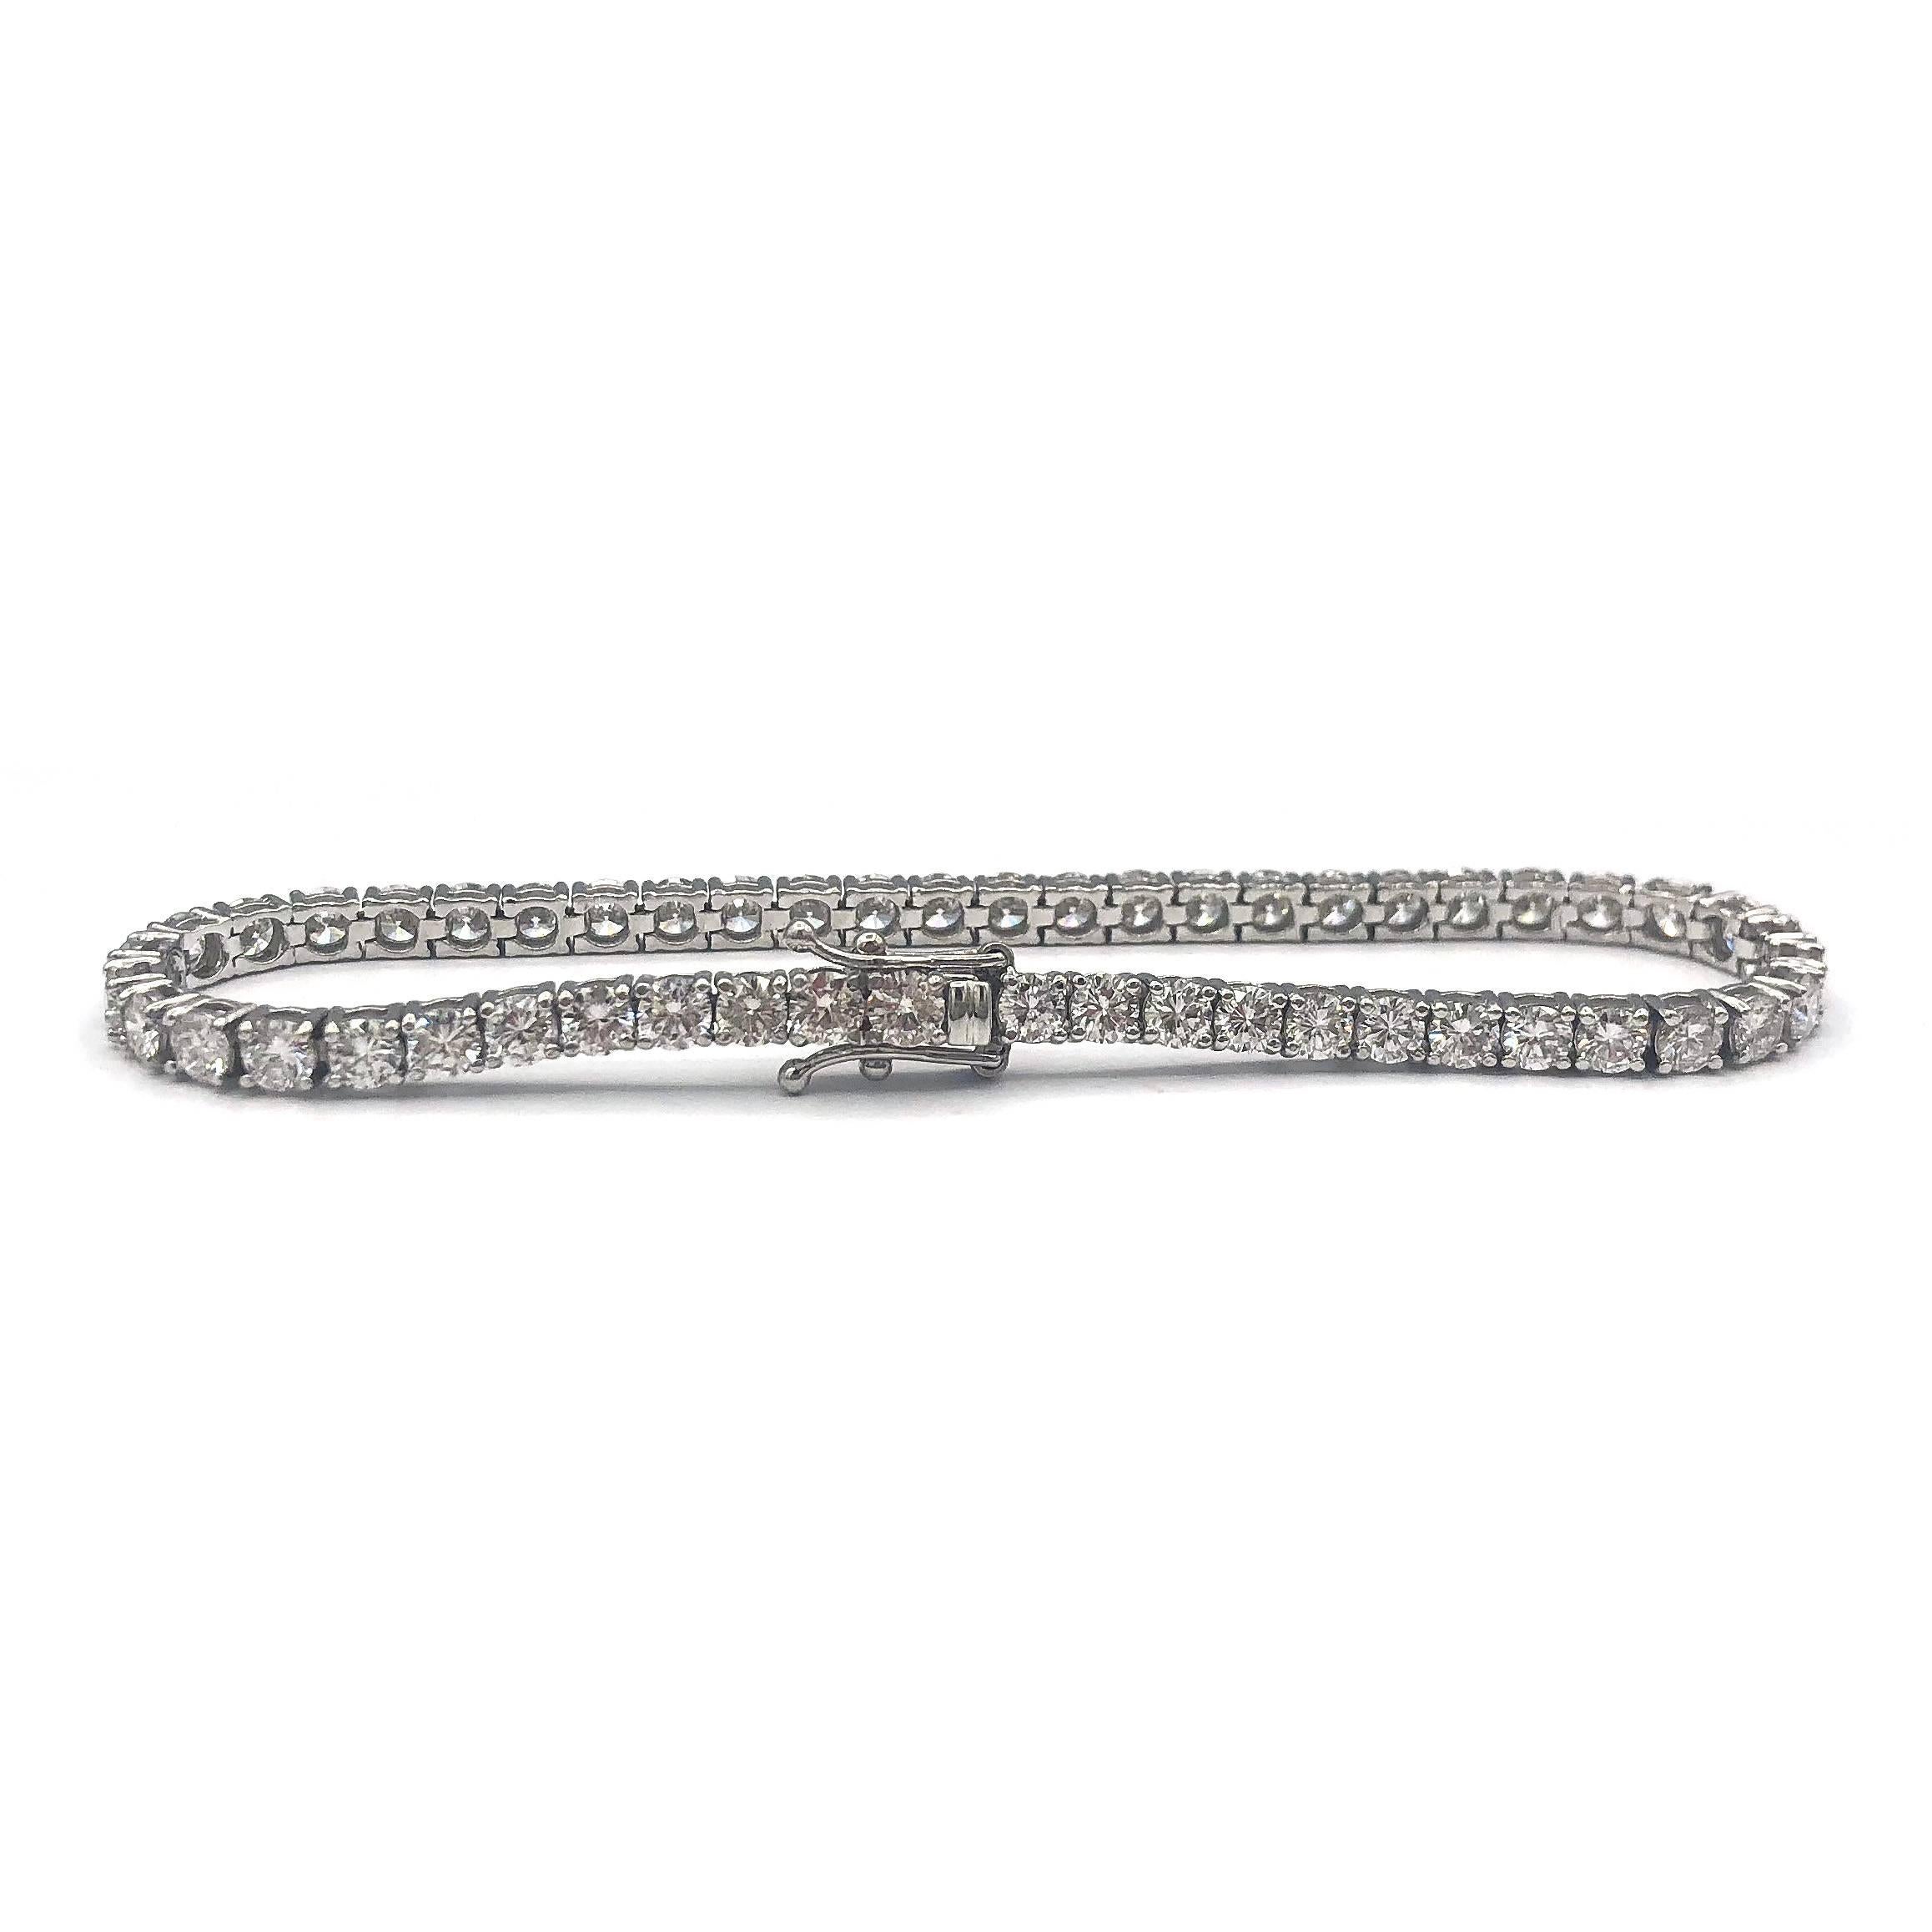 Absolutely amazing Tennis Bracelet with 51 round diamonds
Features approximately 7.65 carats of 51 Round Diamonds VS-S1 clarity mounted in 18K White Gold.

7 inches long, .01 inches wide.

weights 11.28 grams 